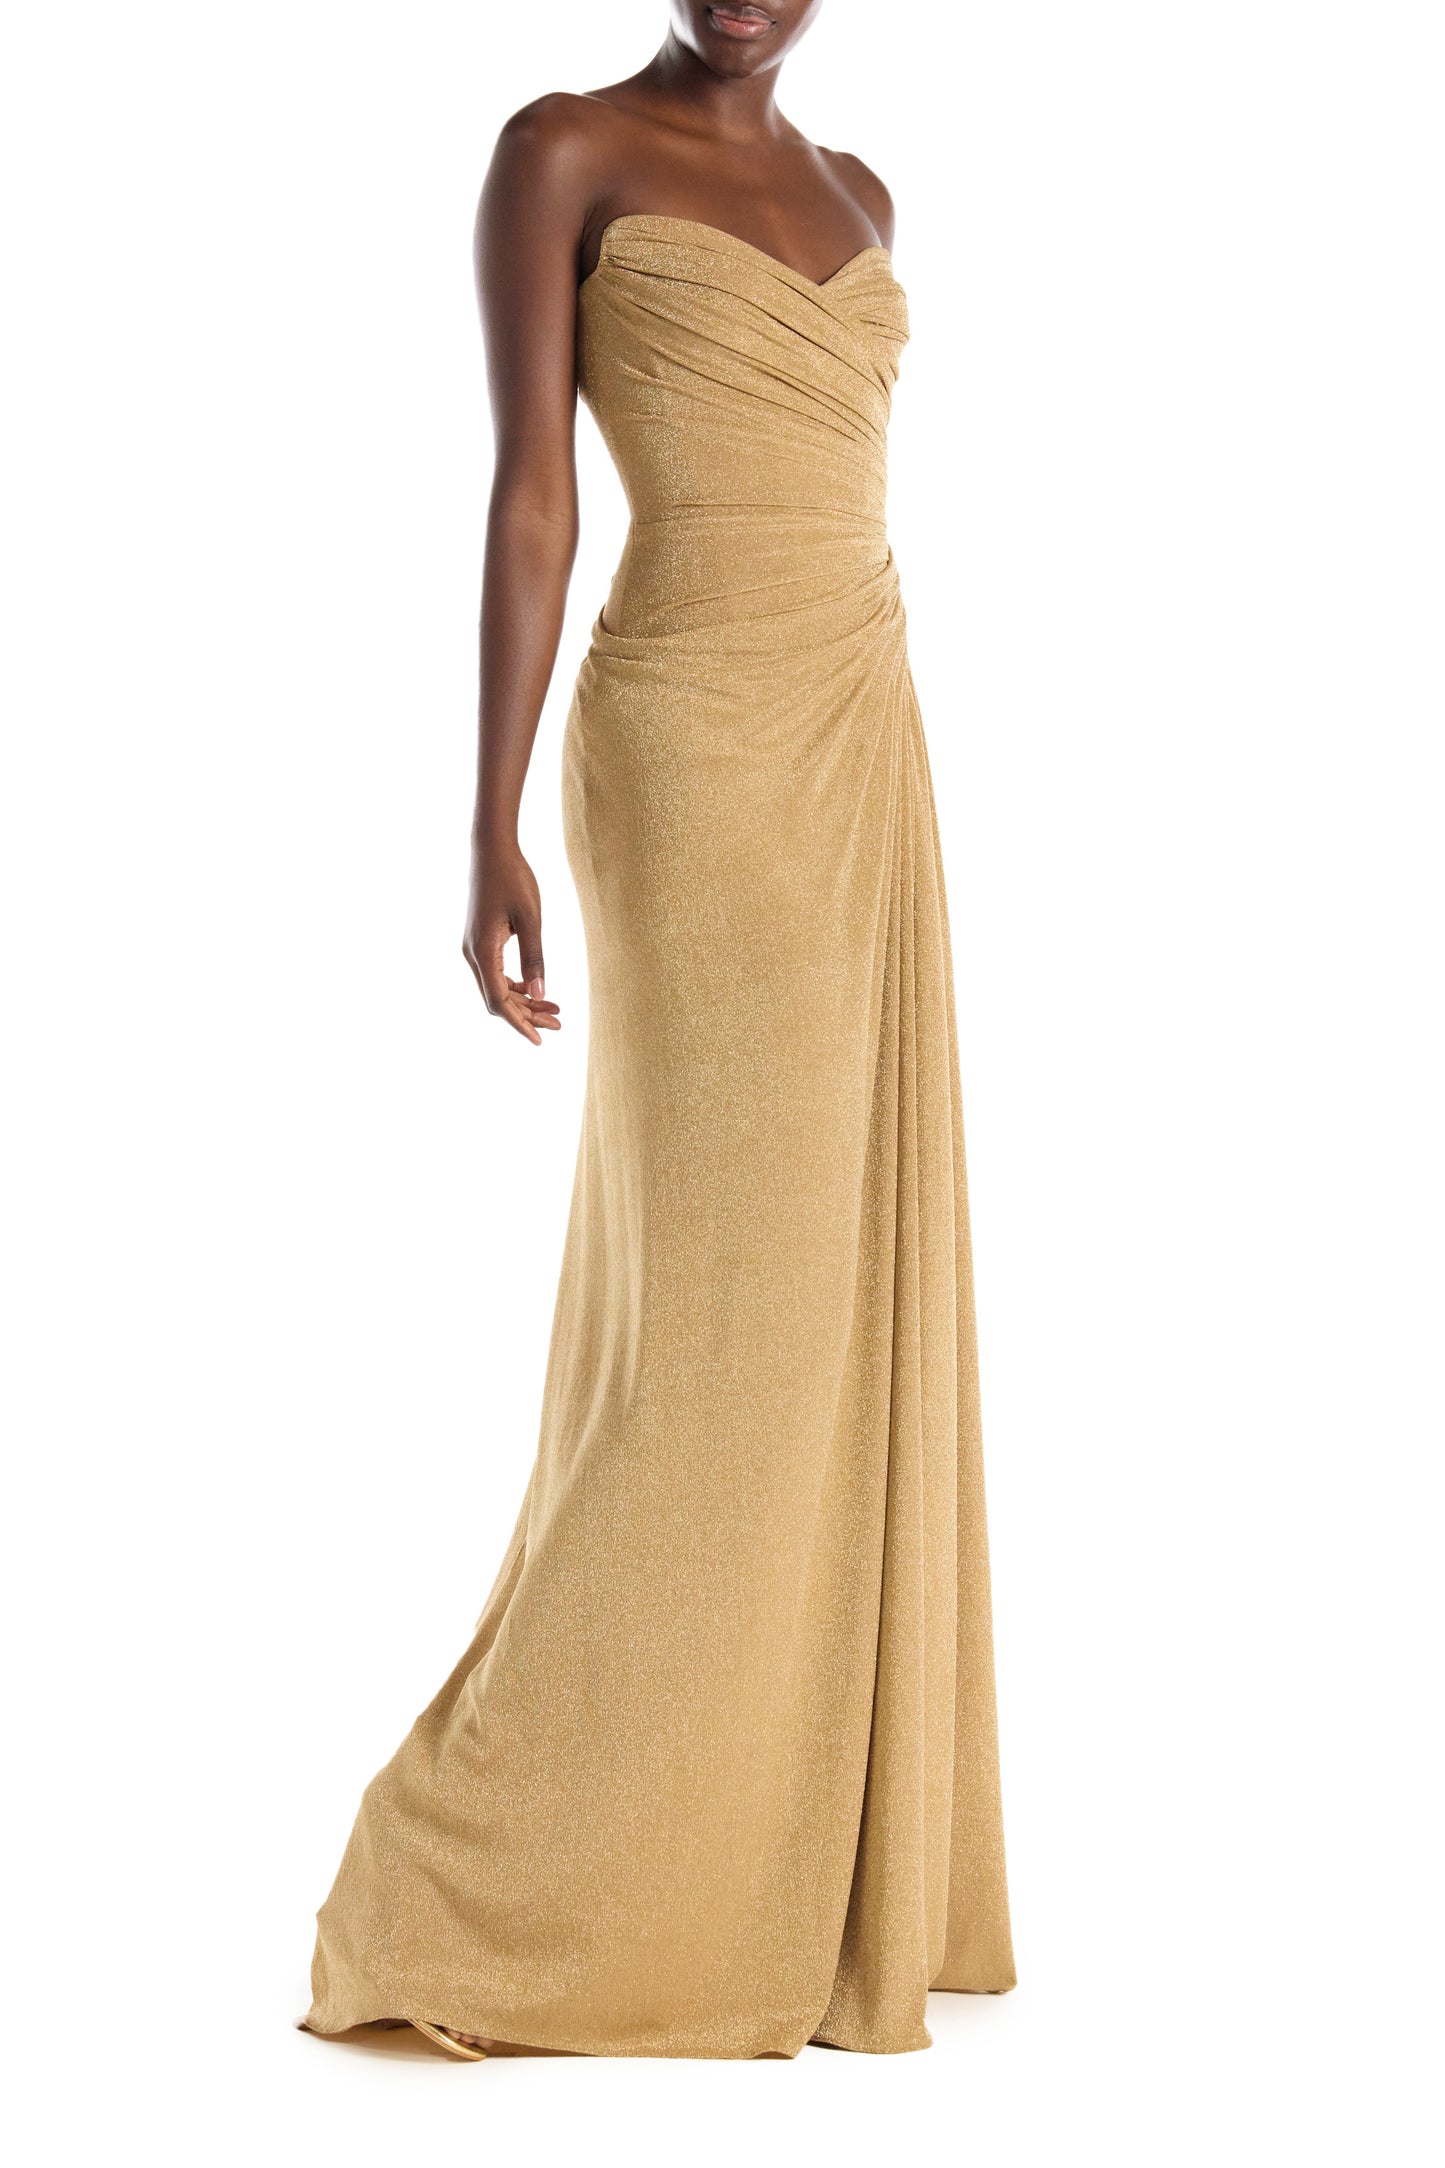 Monique Lhuillier sweetheart neckline strapless gold dress in antique gold glitter knit fabric with high slit.